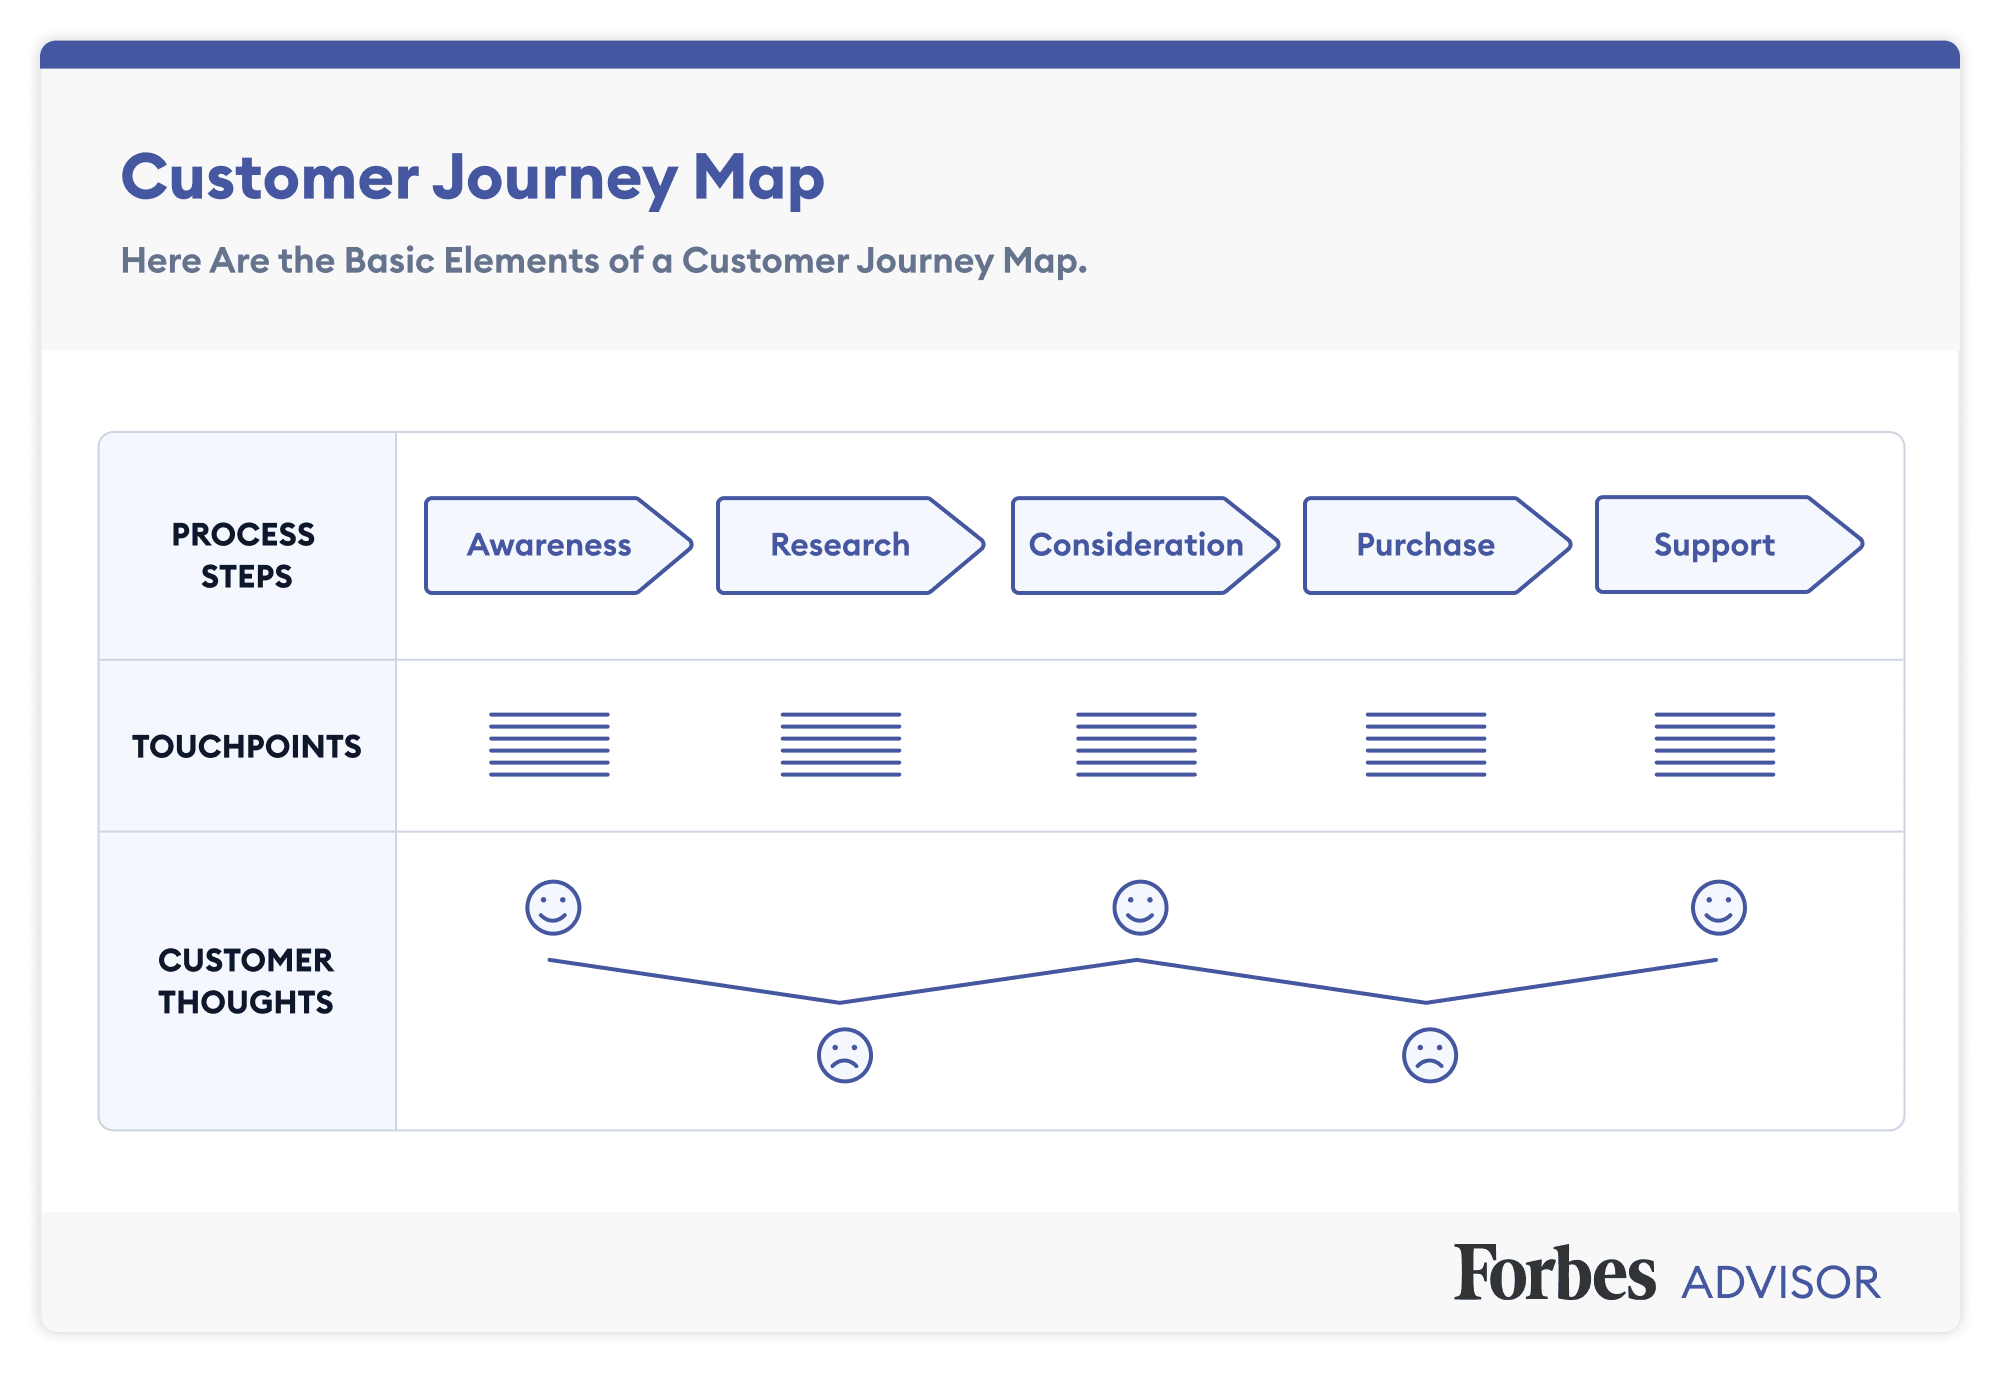 Forbes Customer Journey Map